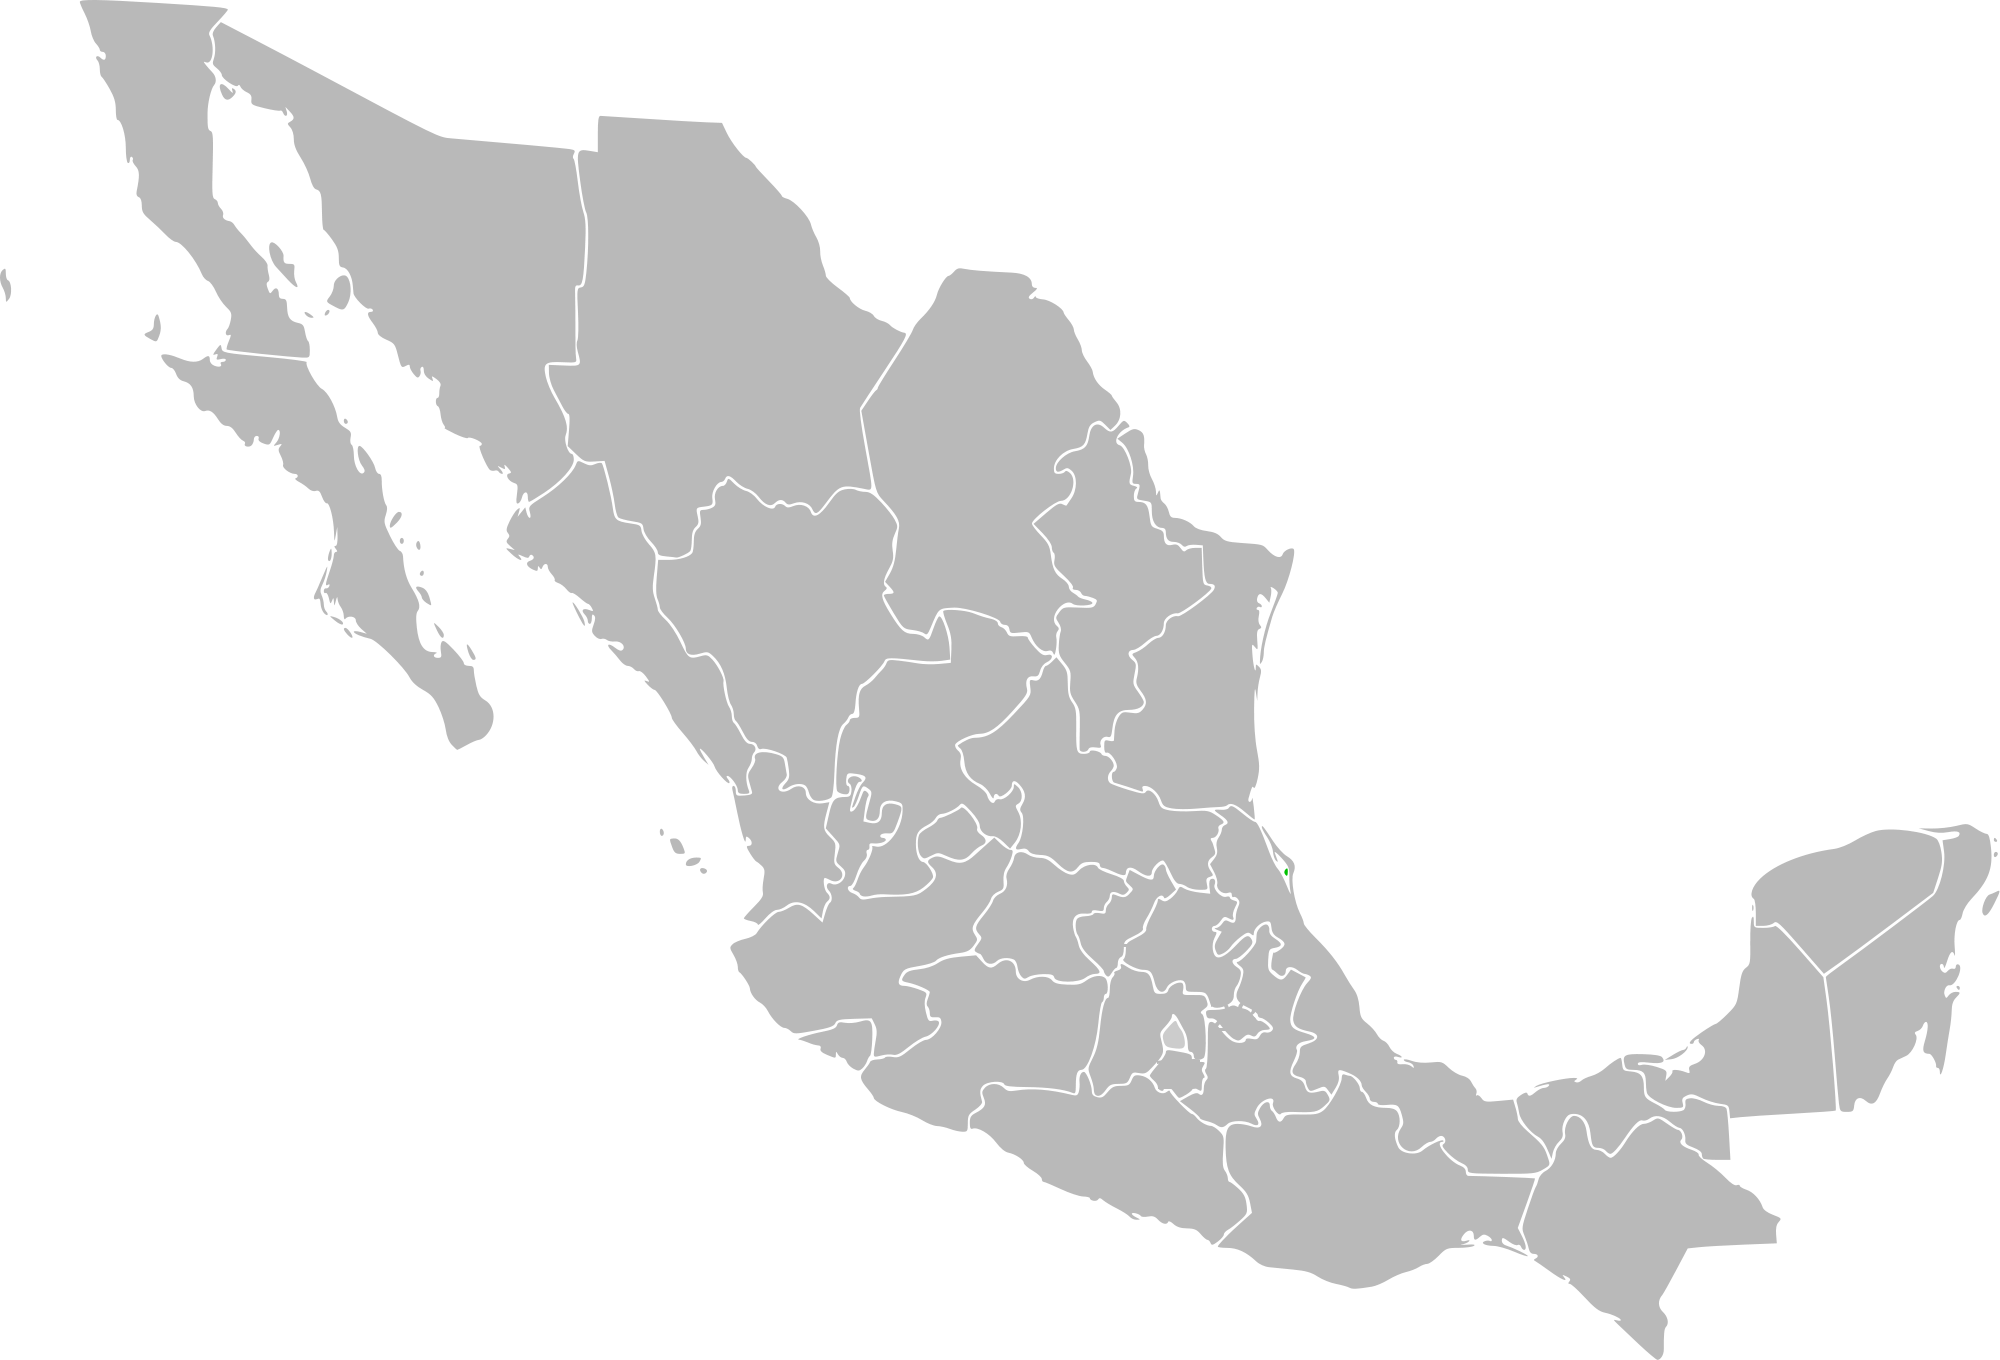 File:Heart Mexico.png